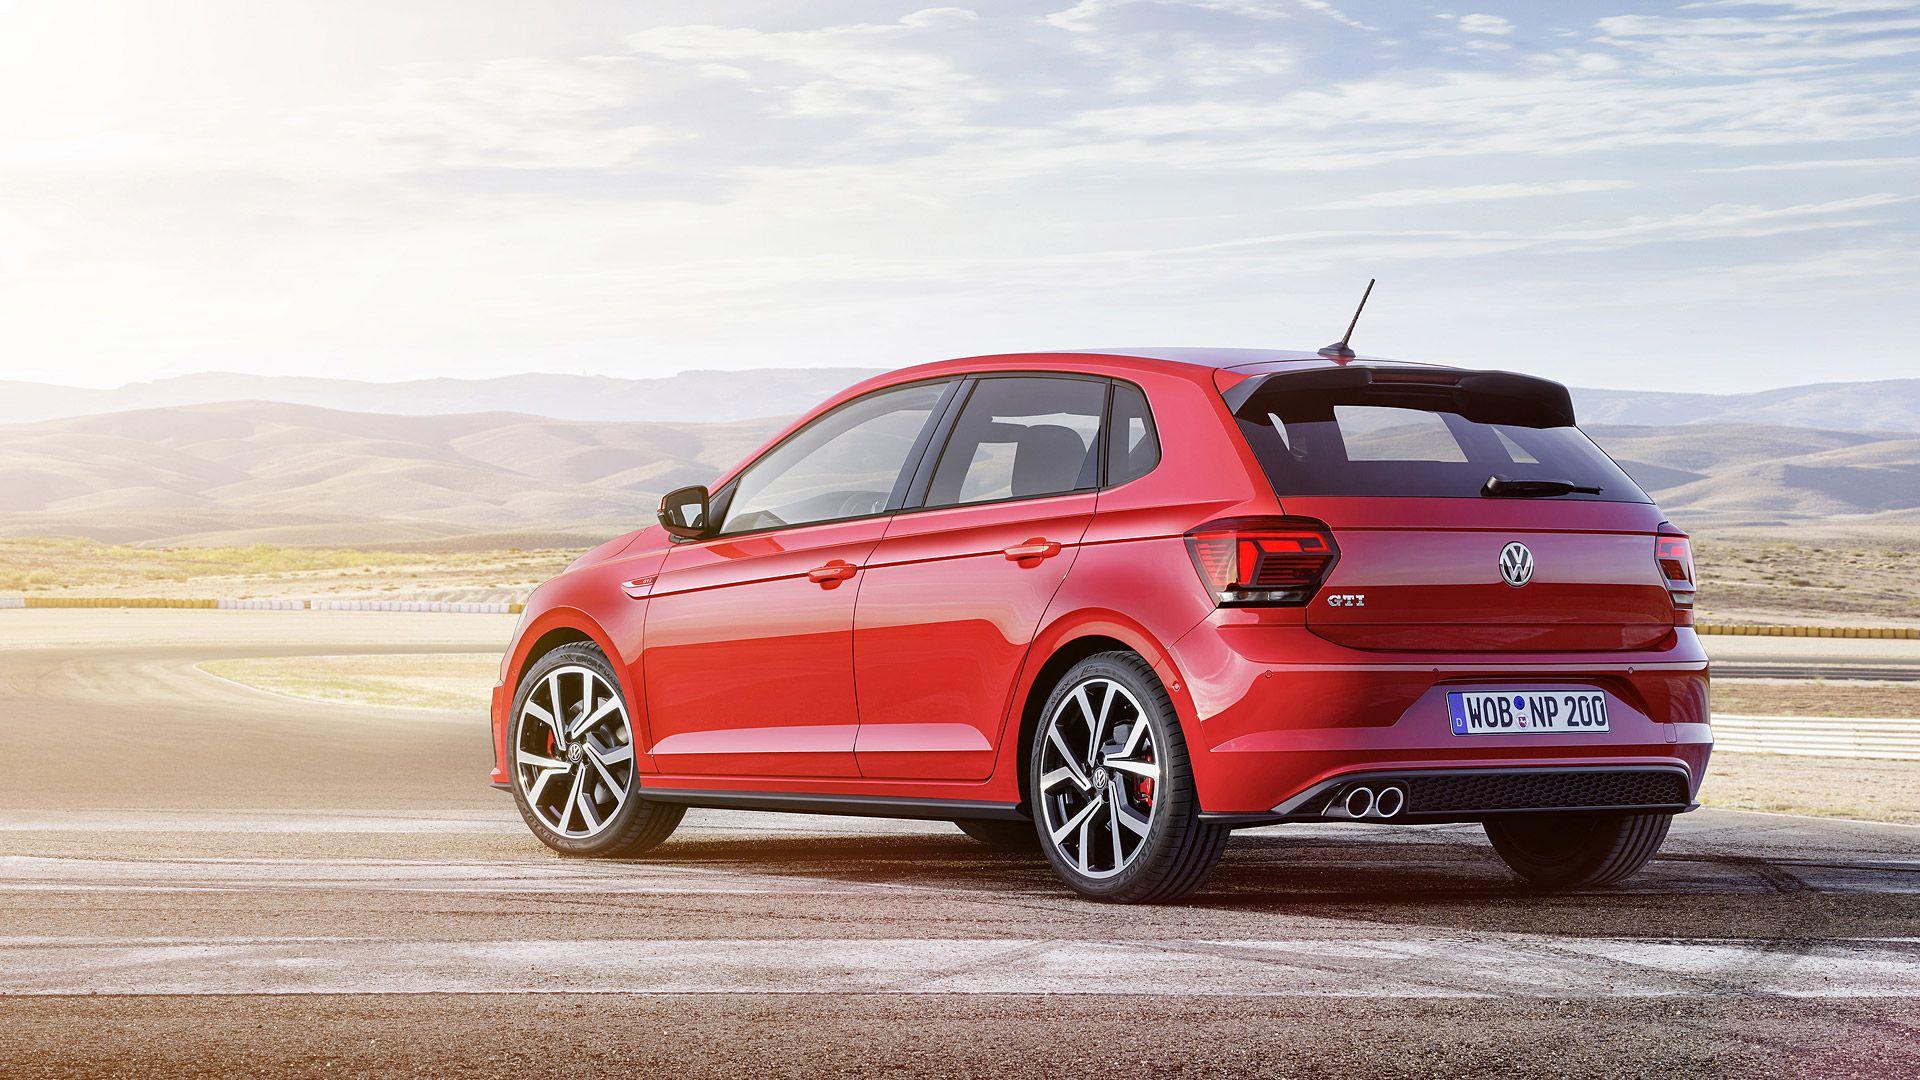 Vw polo wallpapers